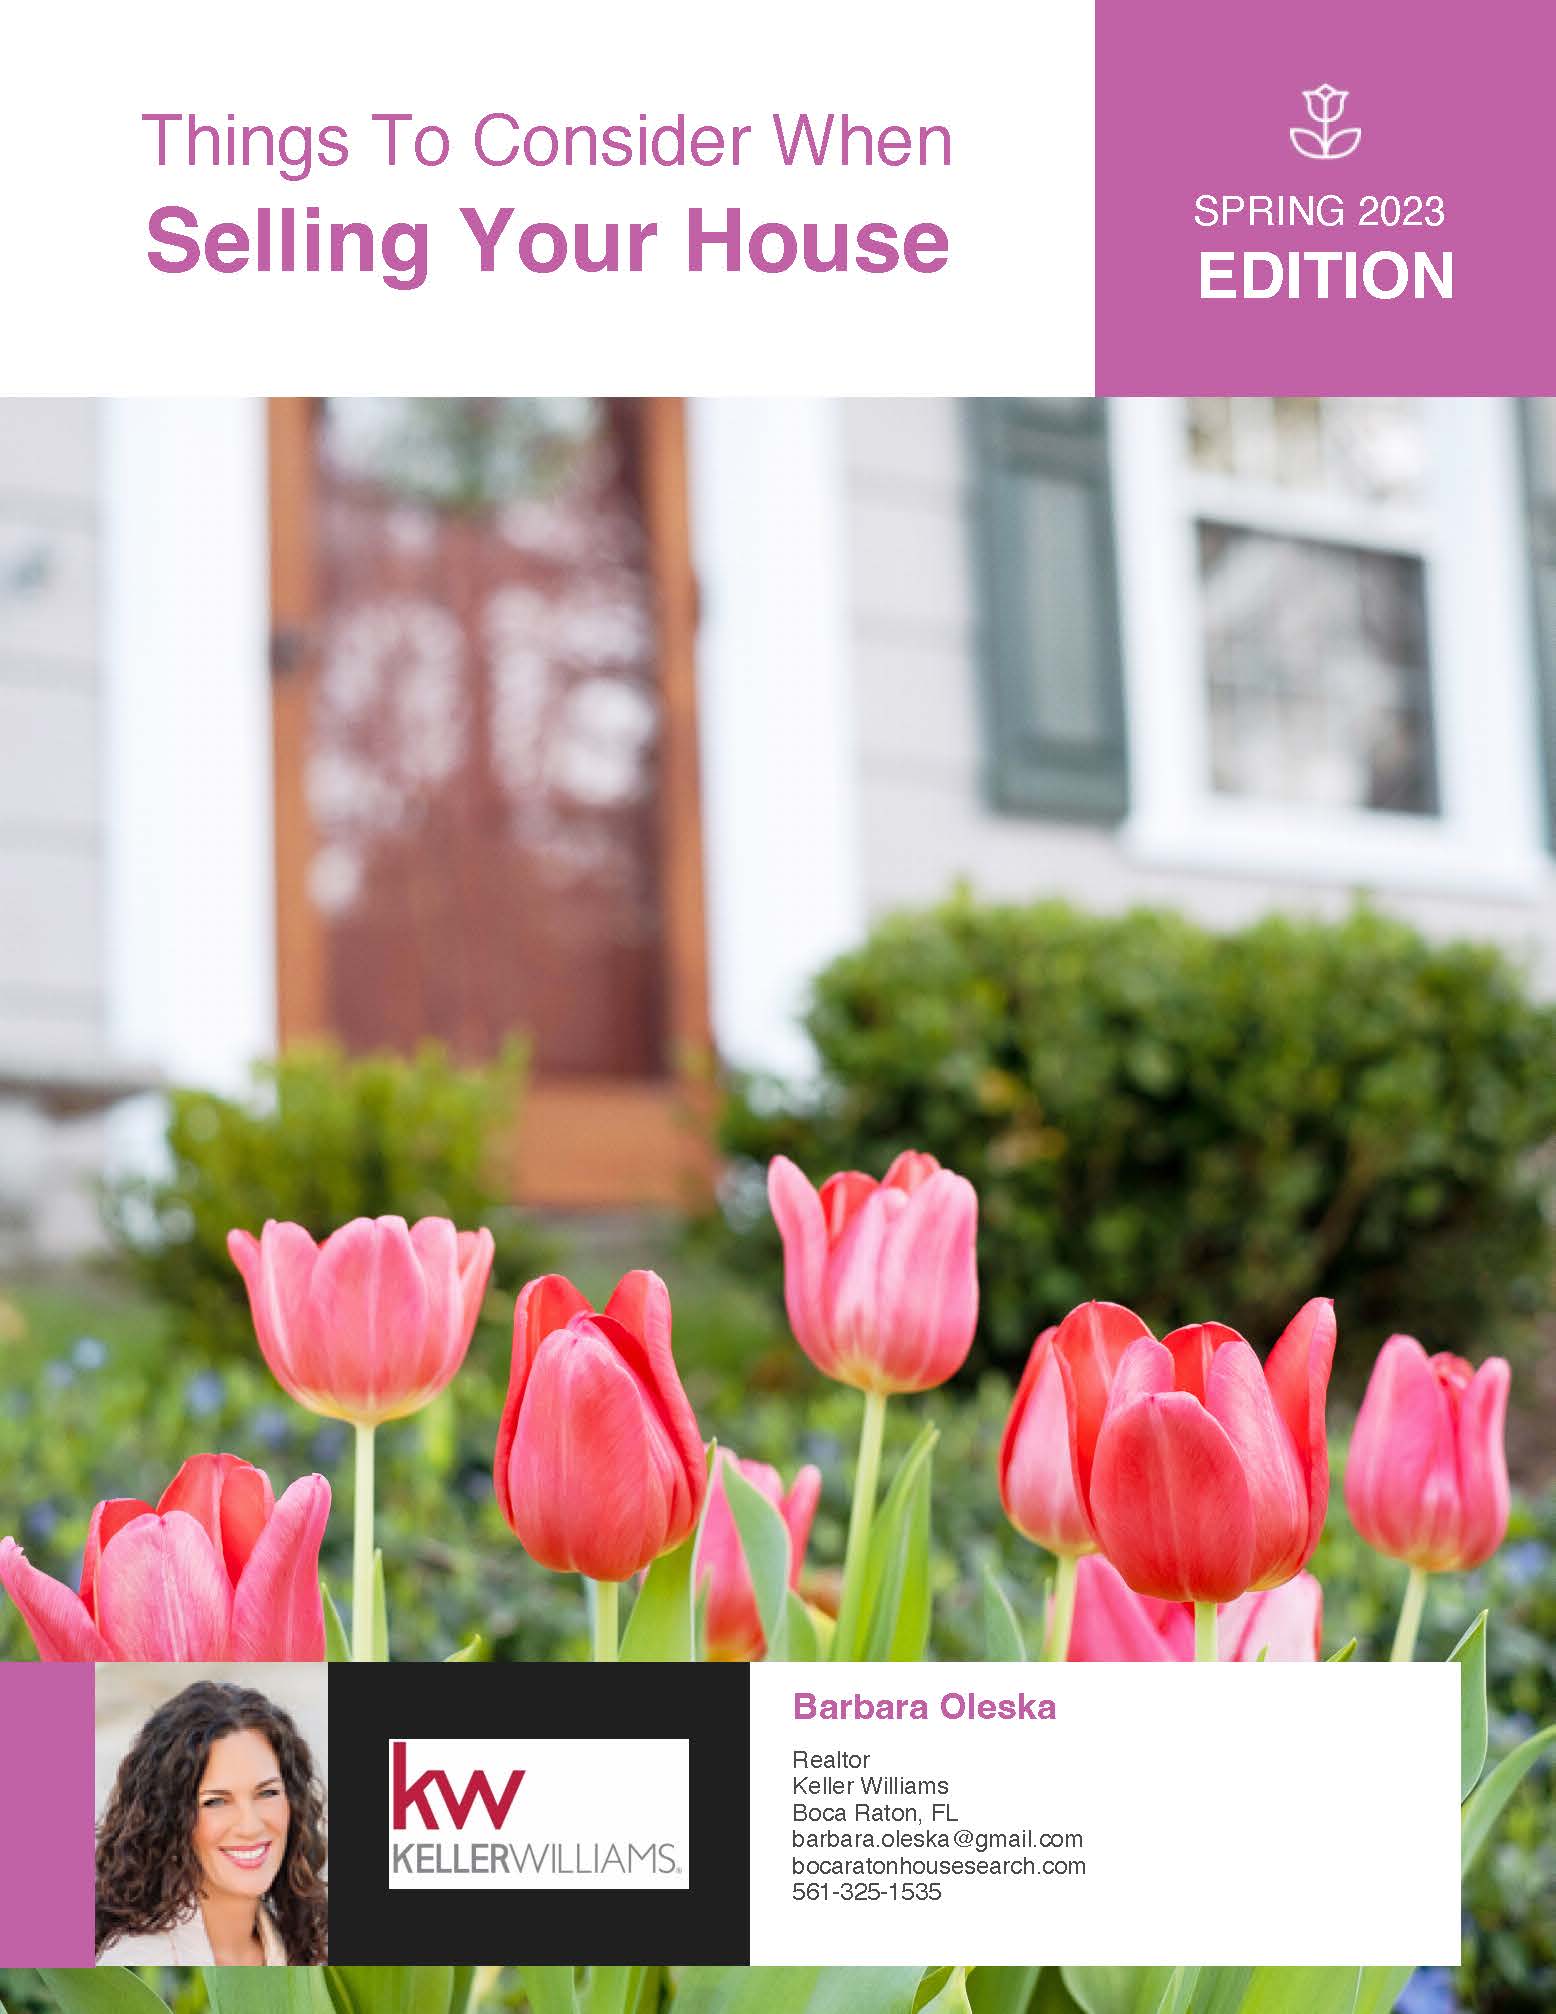 SellingYourHouseSpring2023_Page_01.jpg